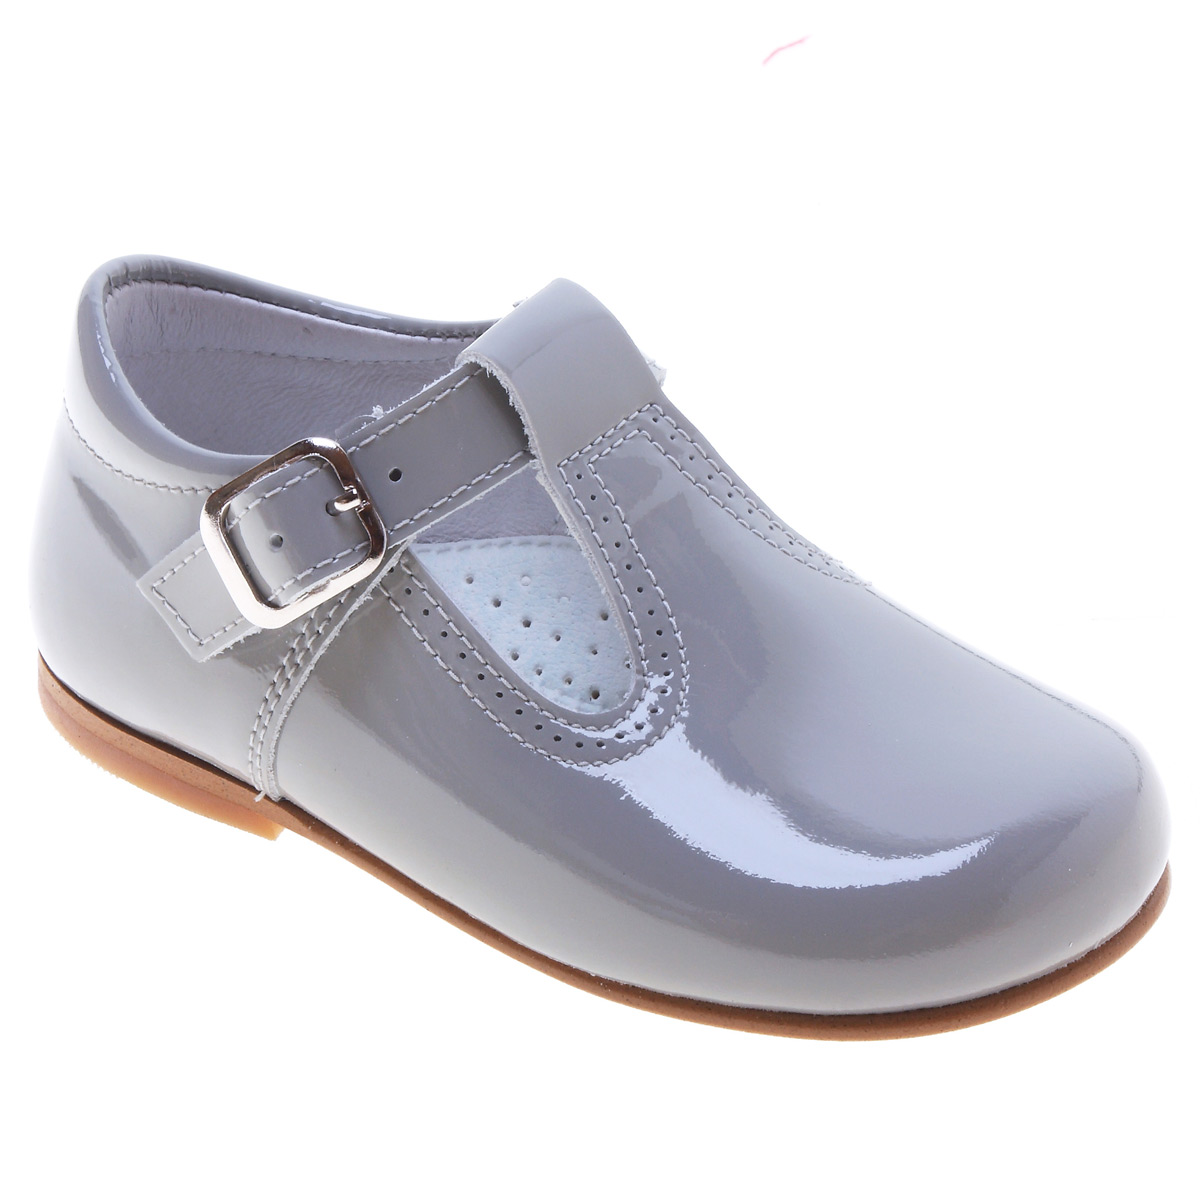 T-Bar Patent Light Grey Or Ice Grey Shoes